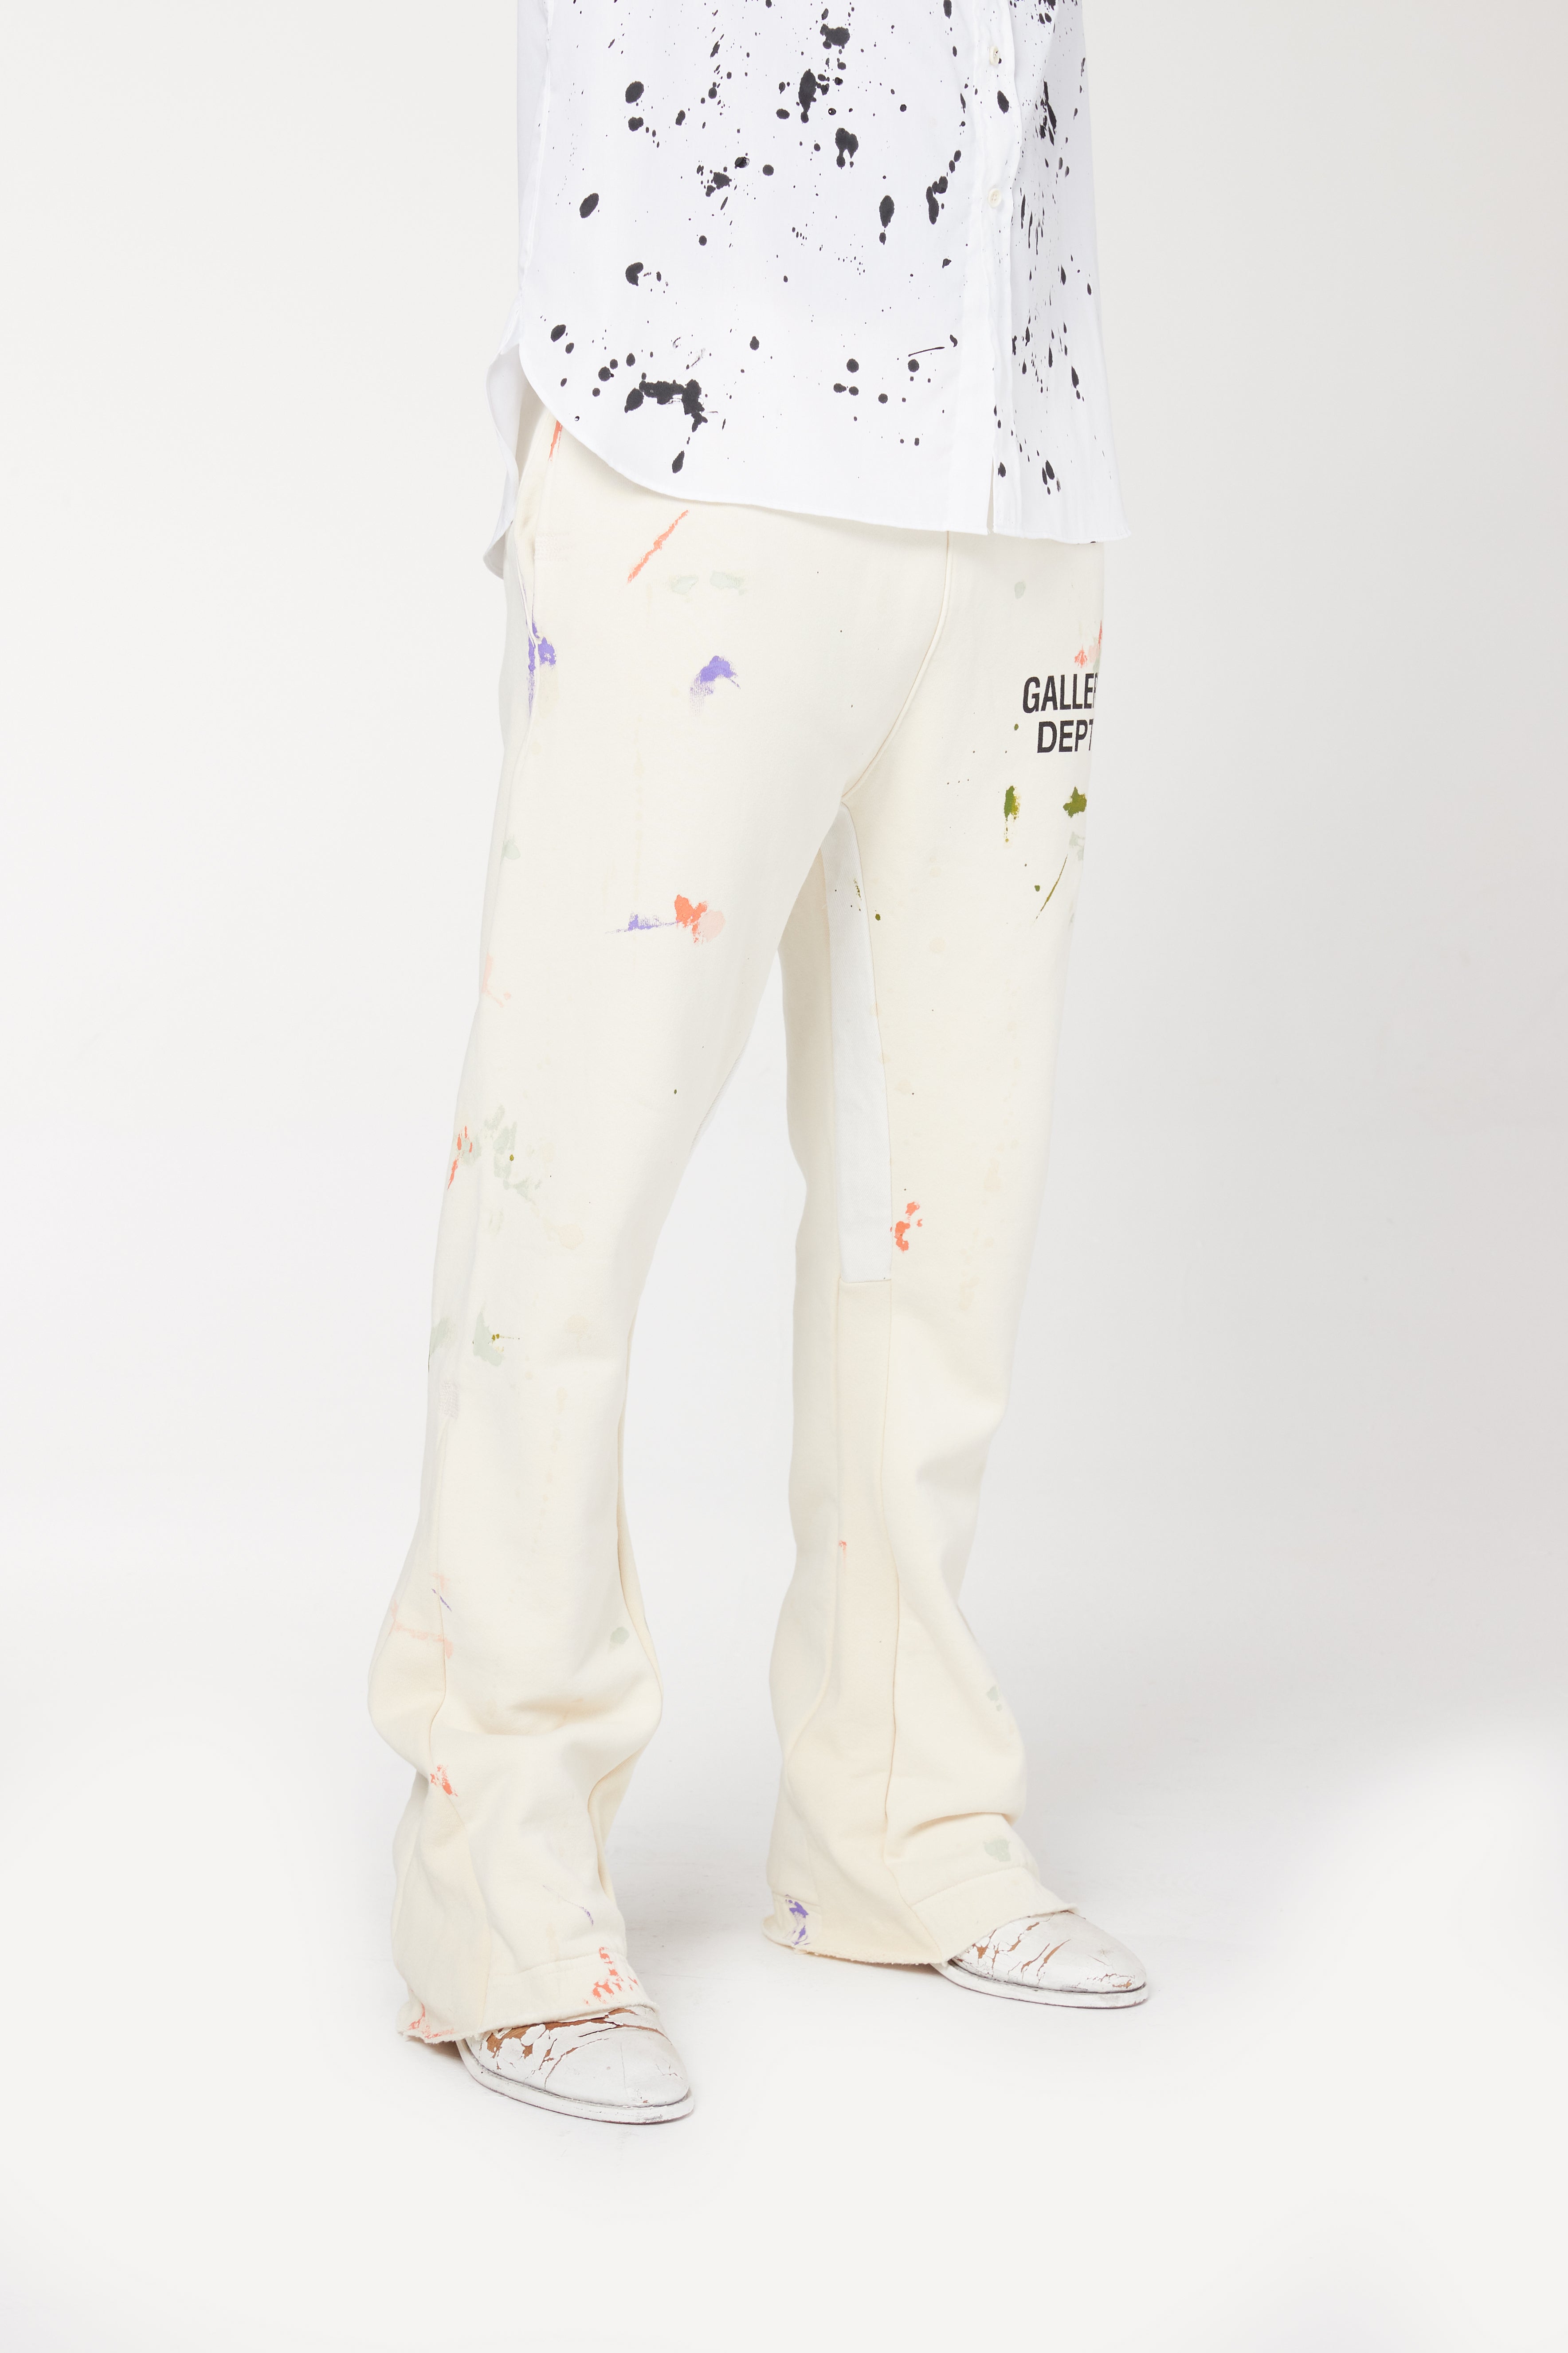 Gallery Dept. Flared painted Sweatpants grey  Drippy outfit, Clothing  brand, Trouser design